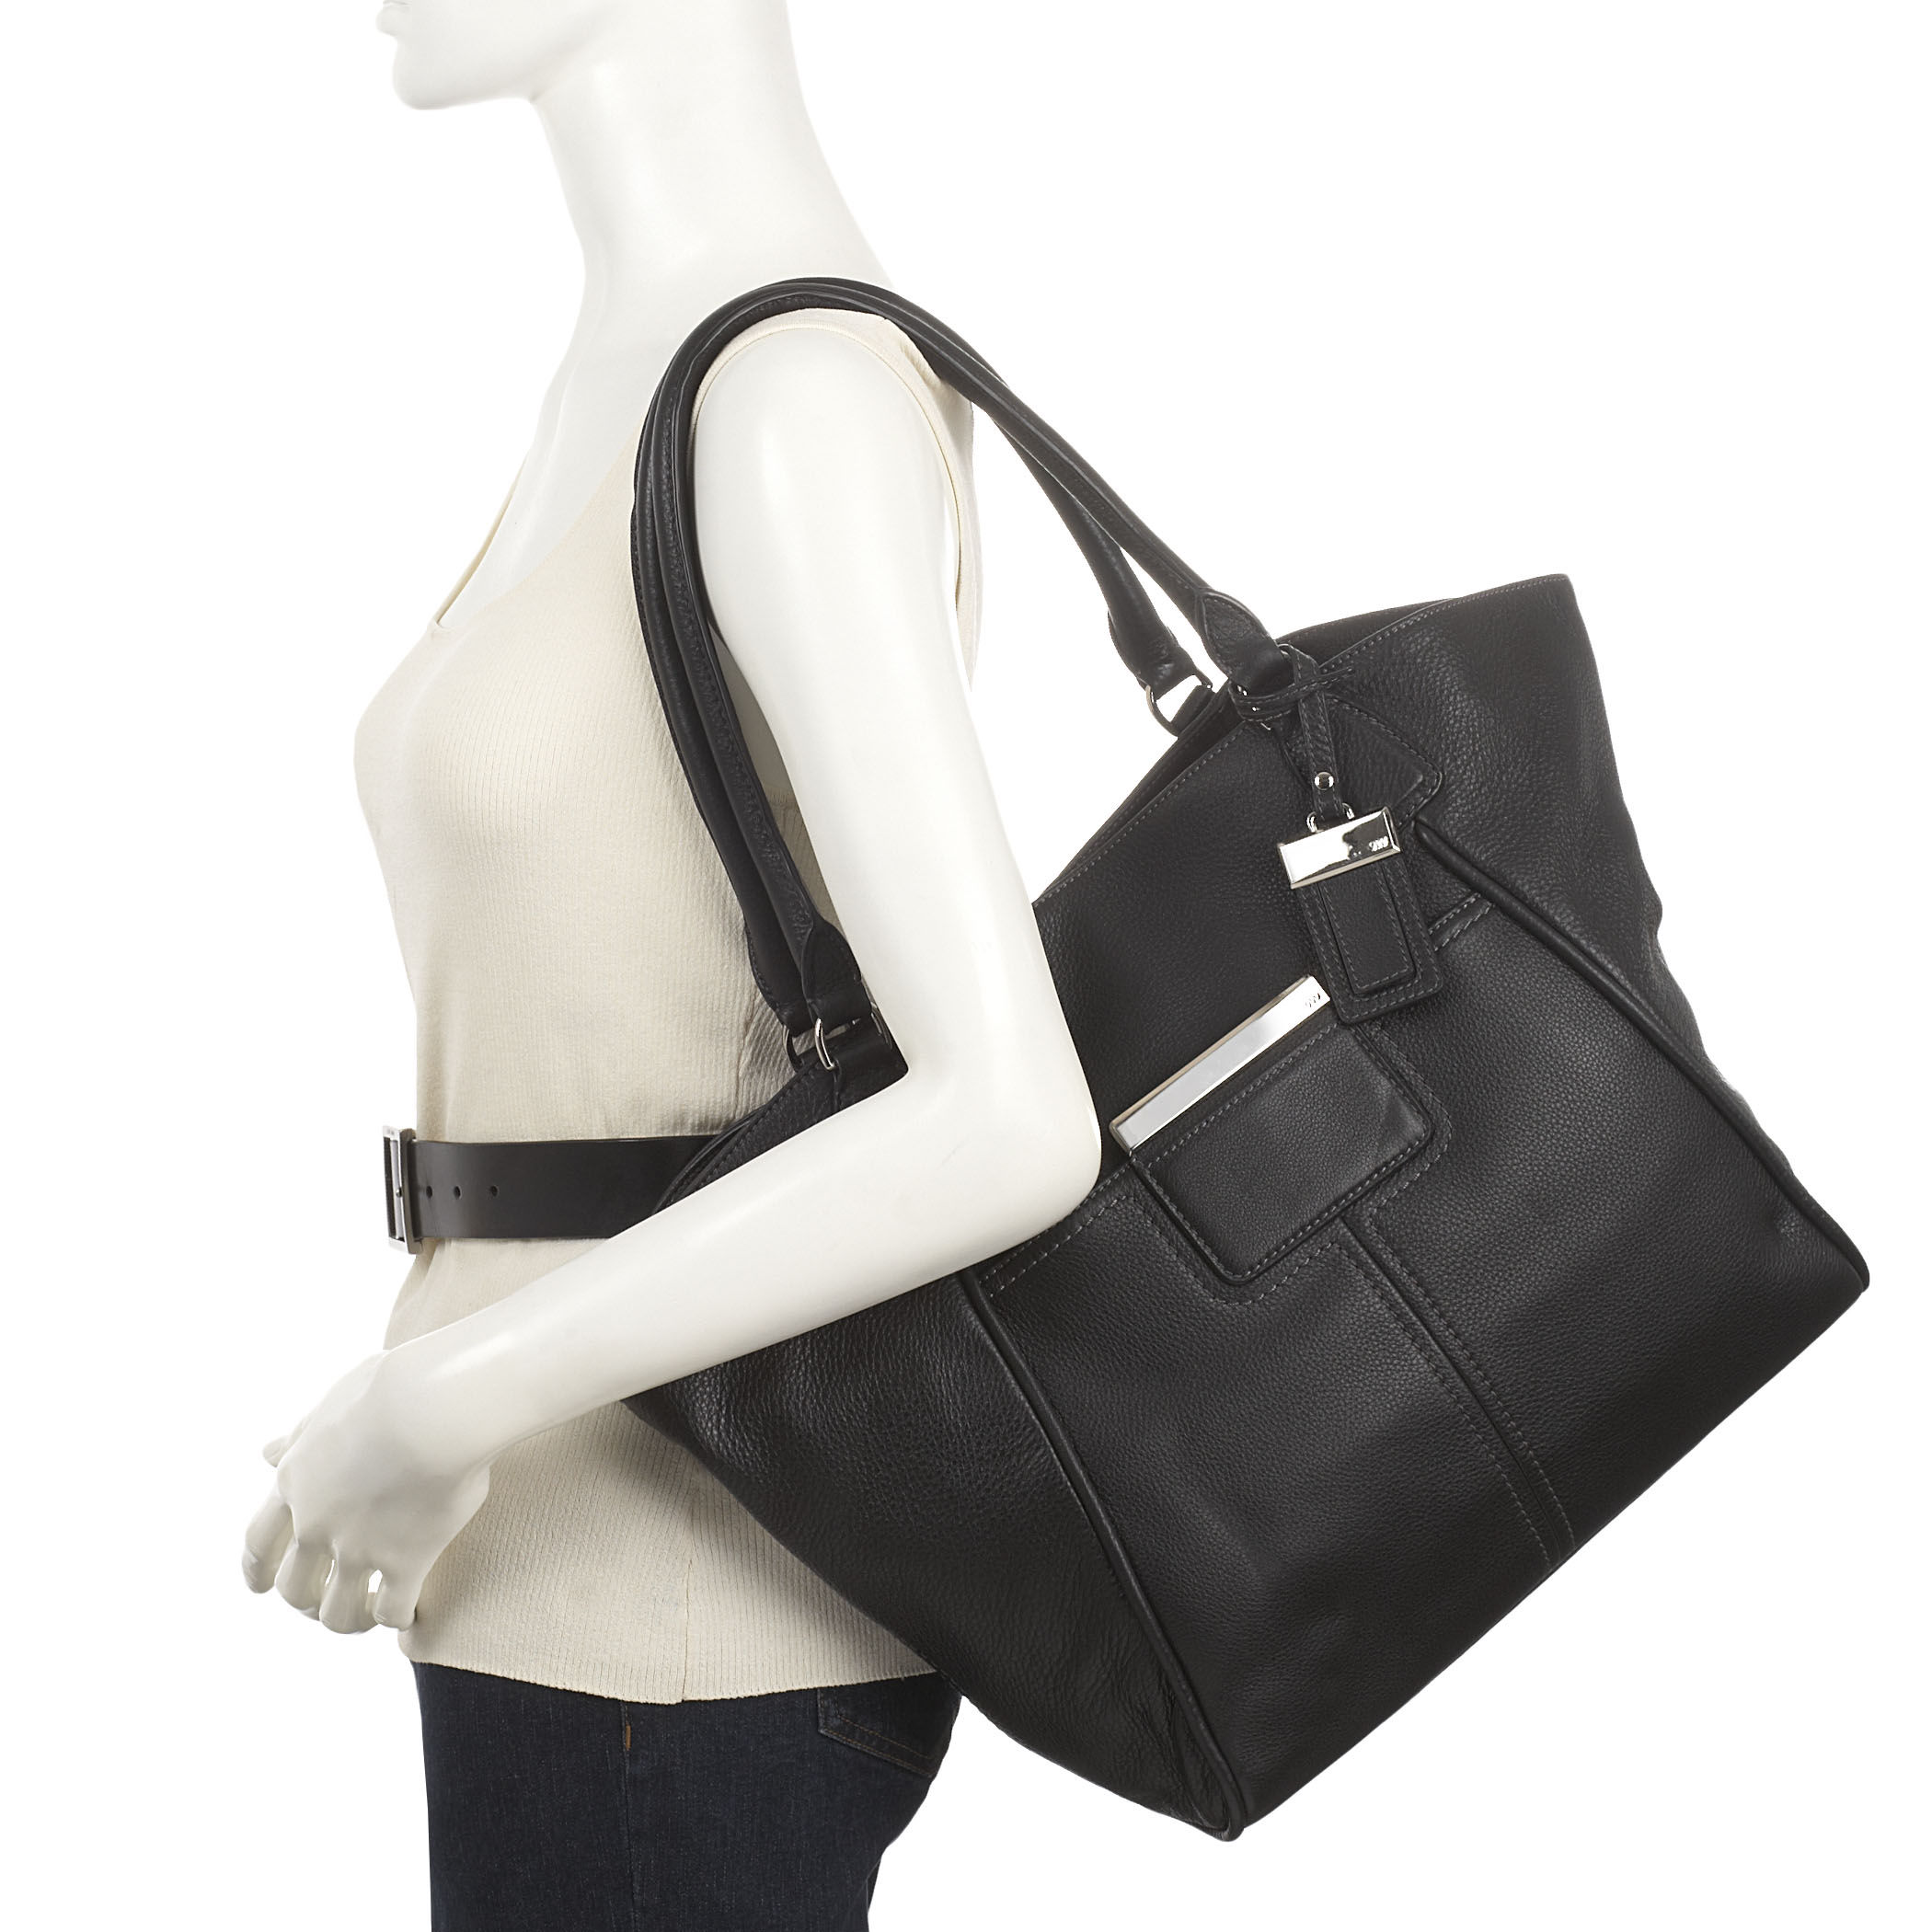 Nine west Grammercy Large Leather Tote in Black | Lyst